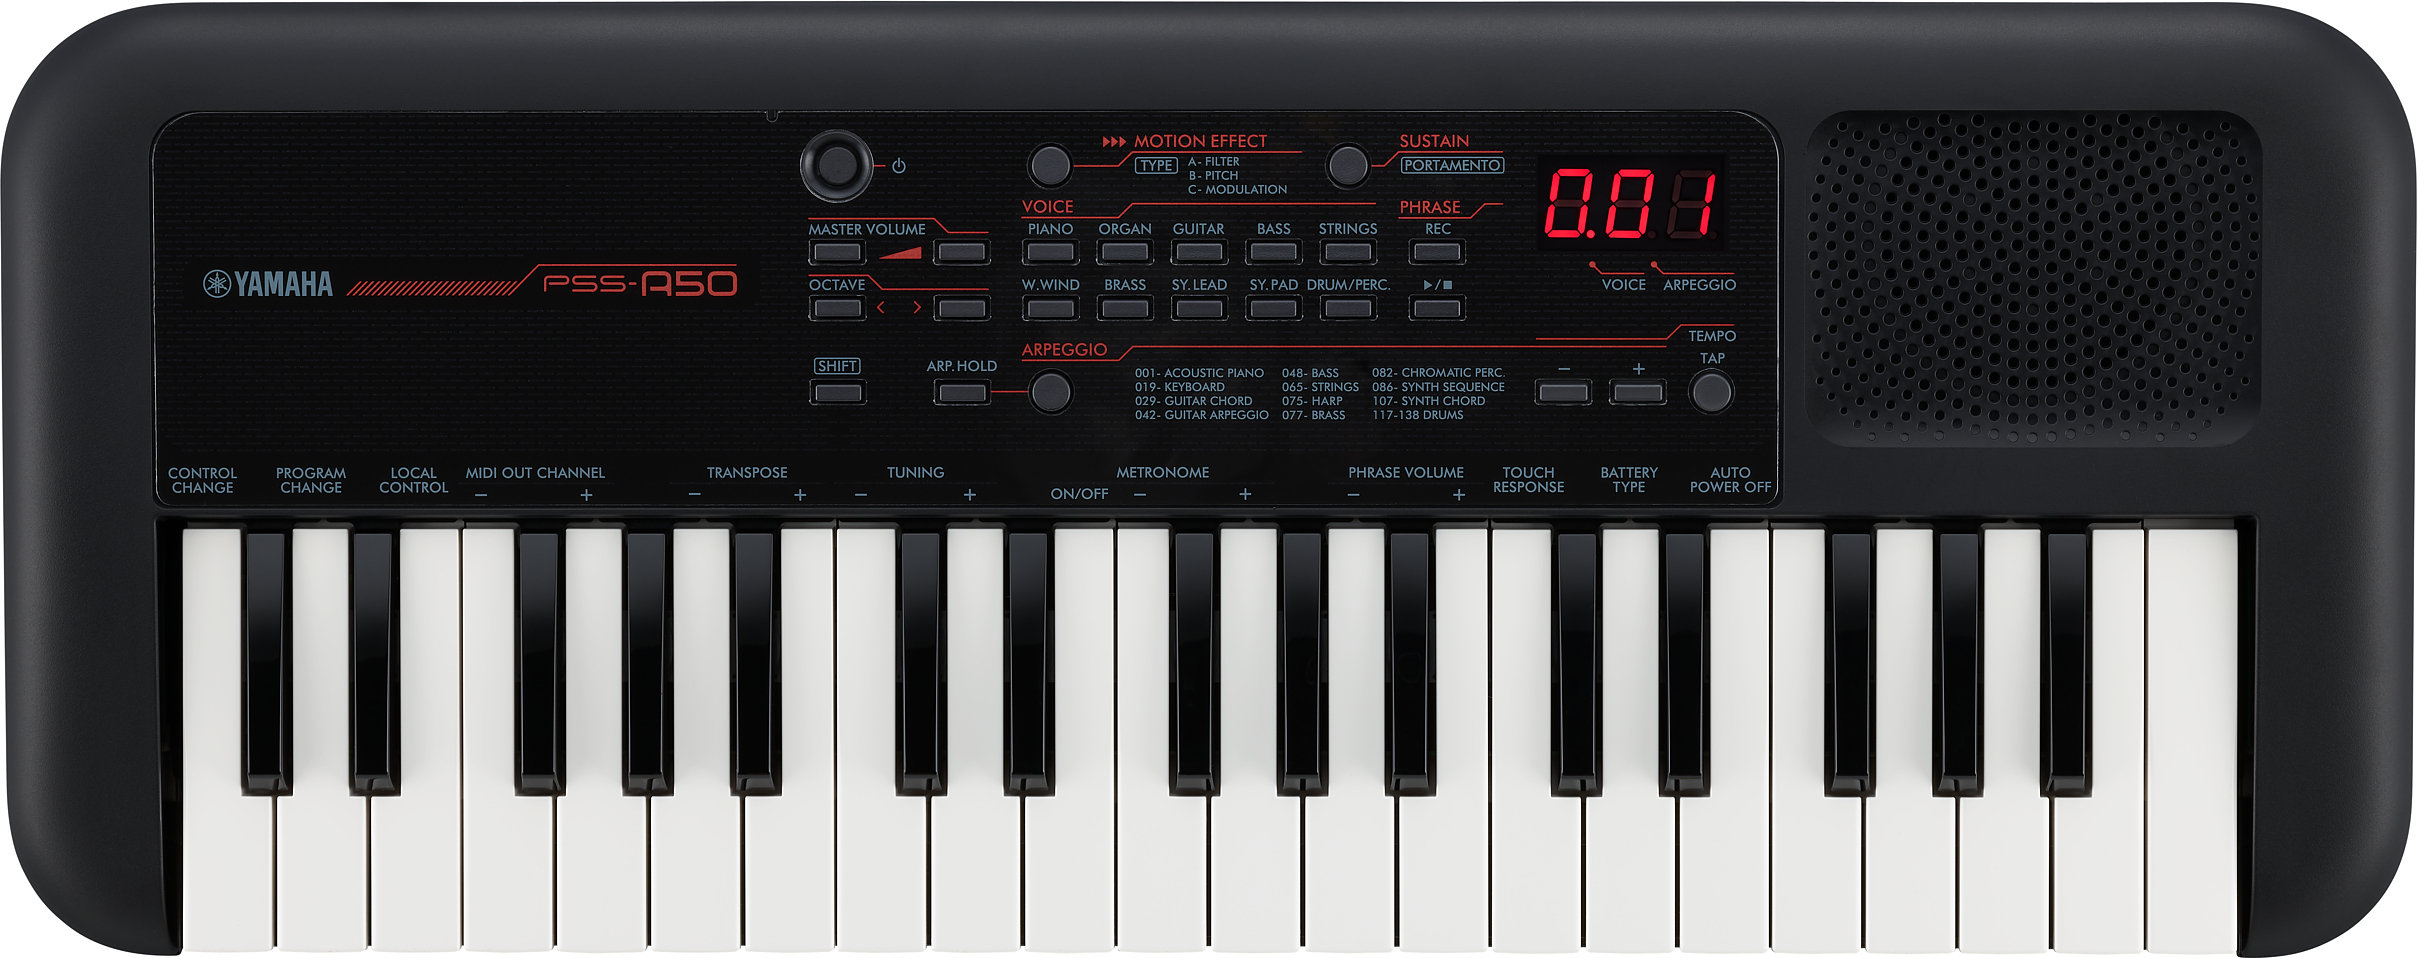 Yamaha Pss-a50 - Entertainer Keyboard - Main picture